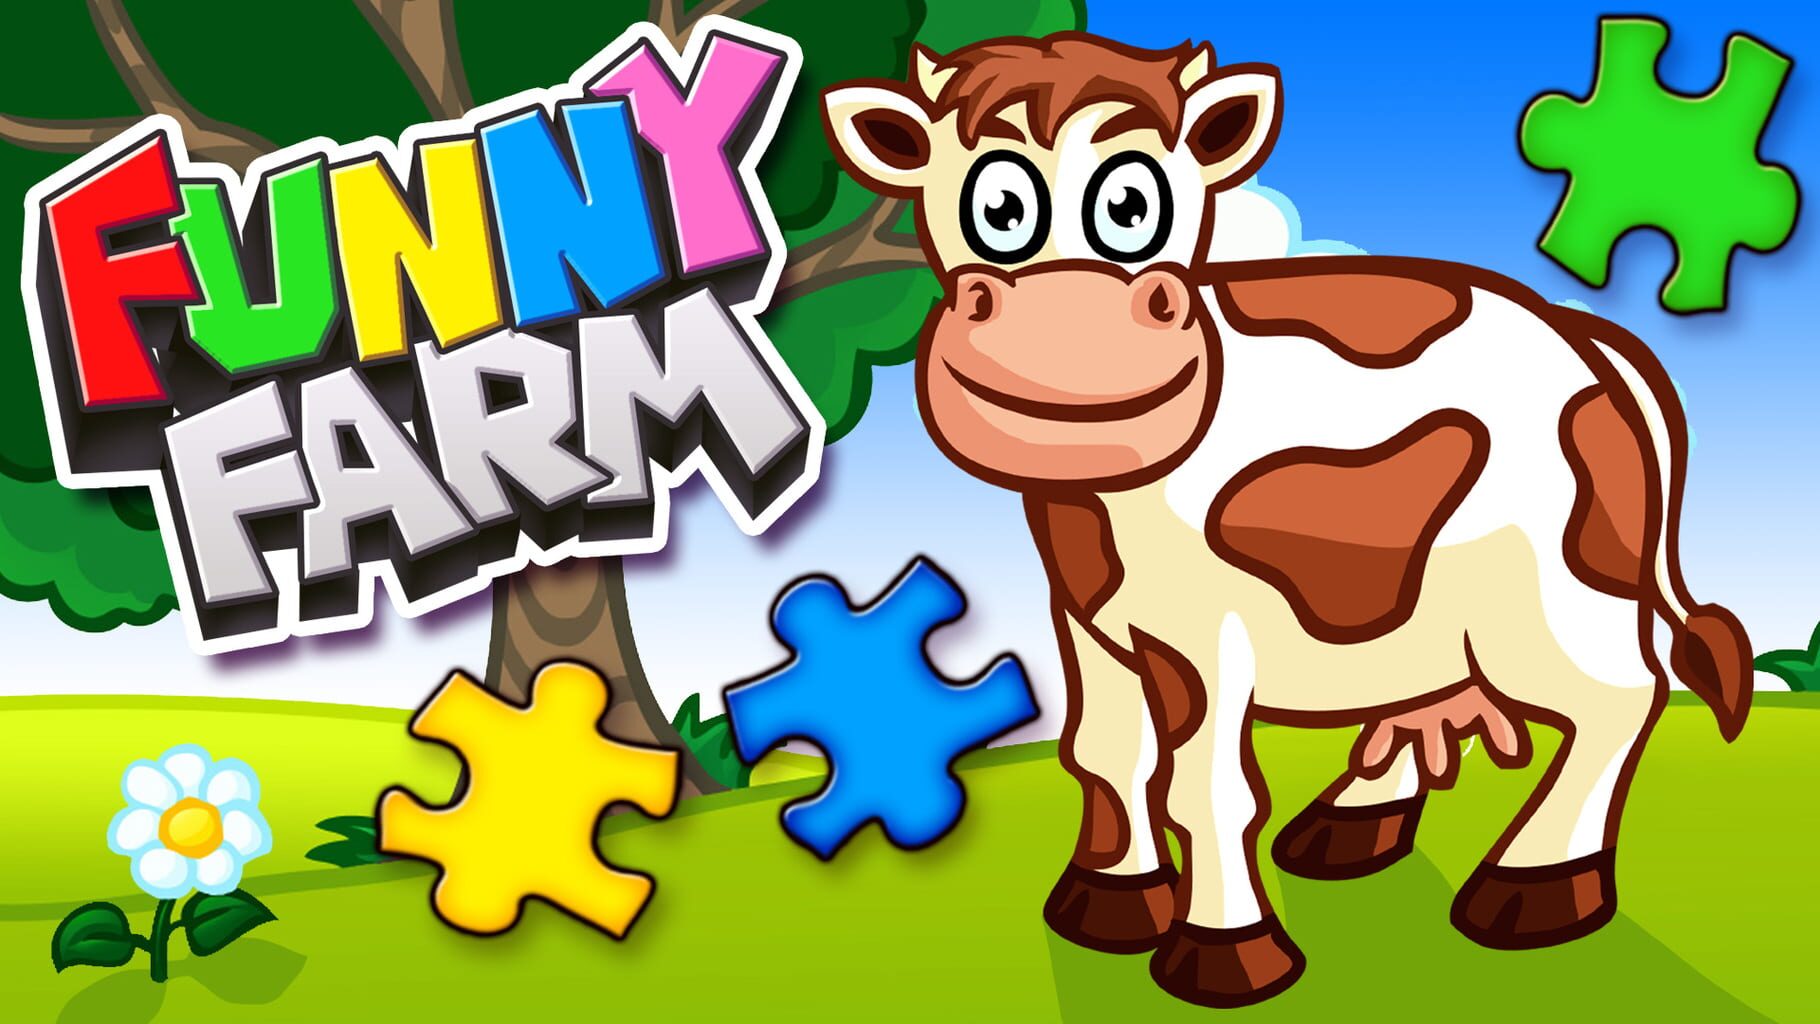 Funny Farm Animal Jigsaw Puzzle Game for Kids and Toddlers artwork